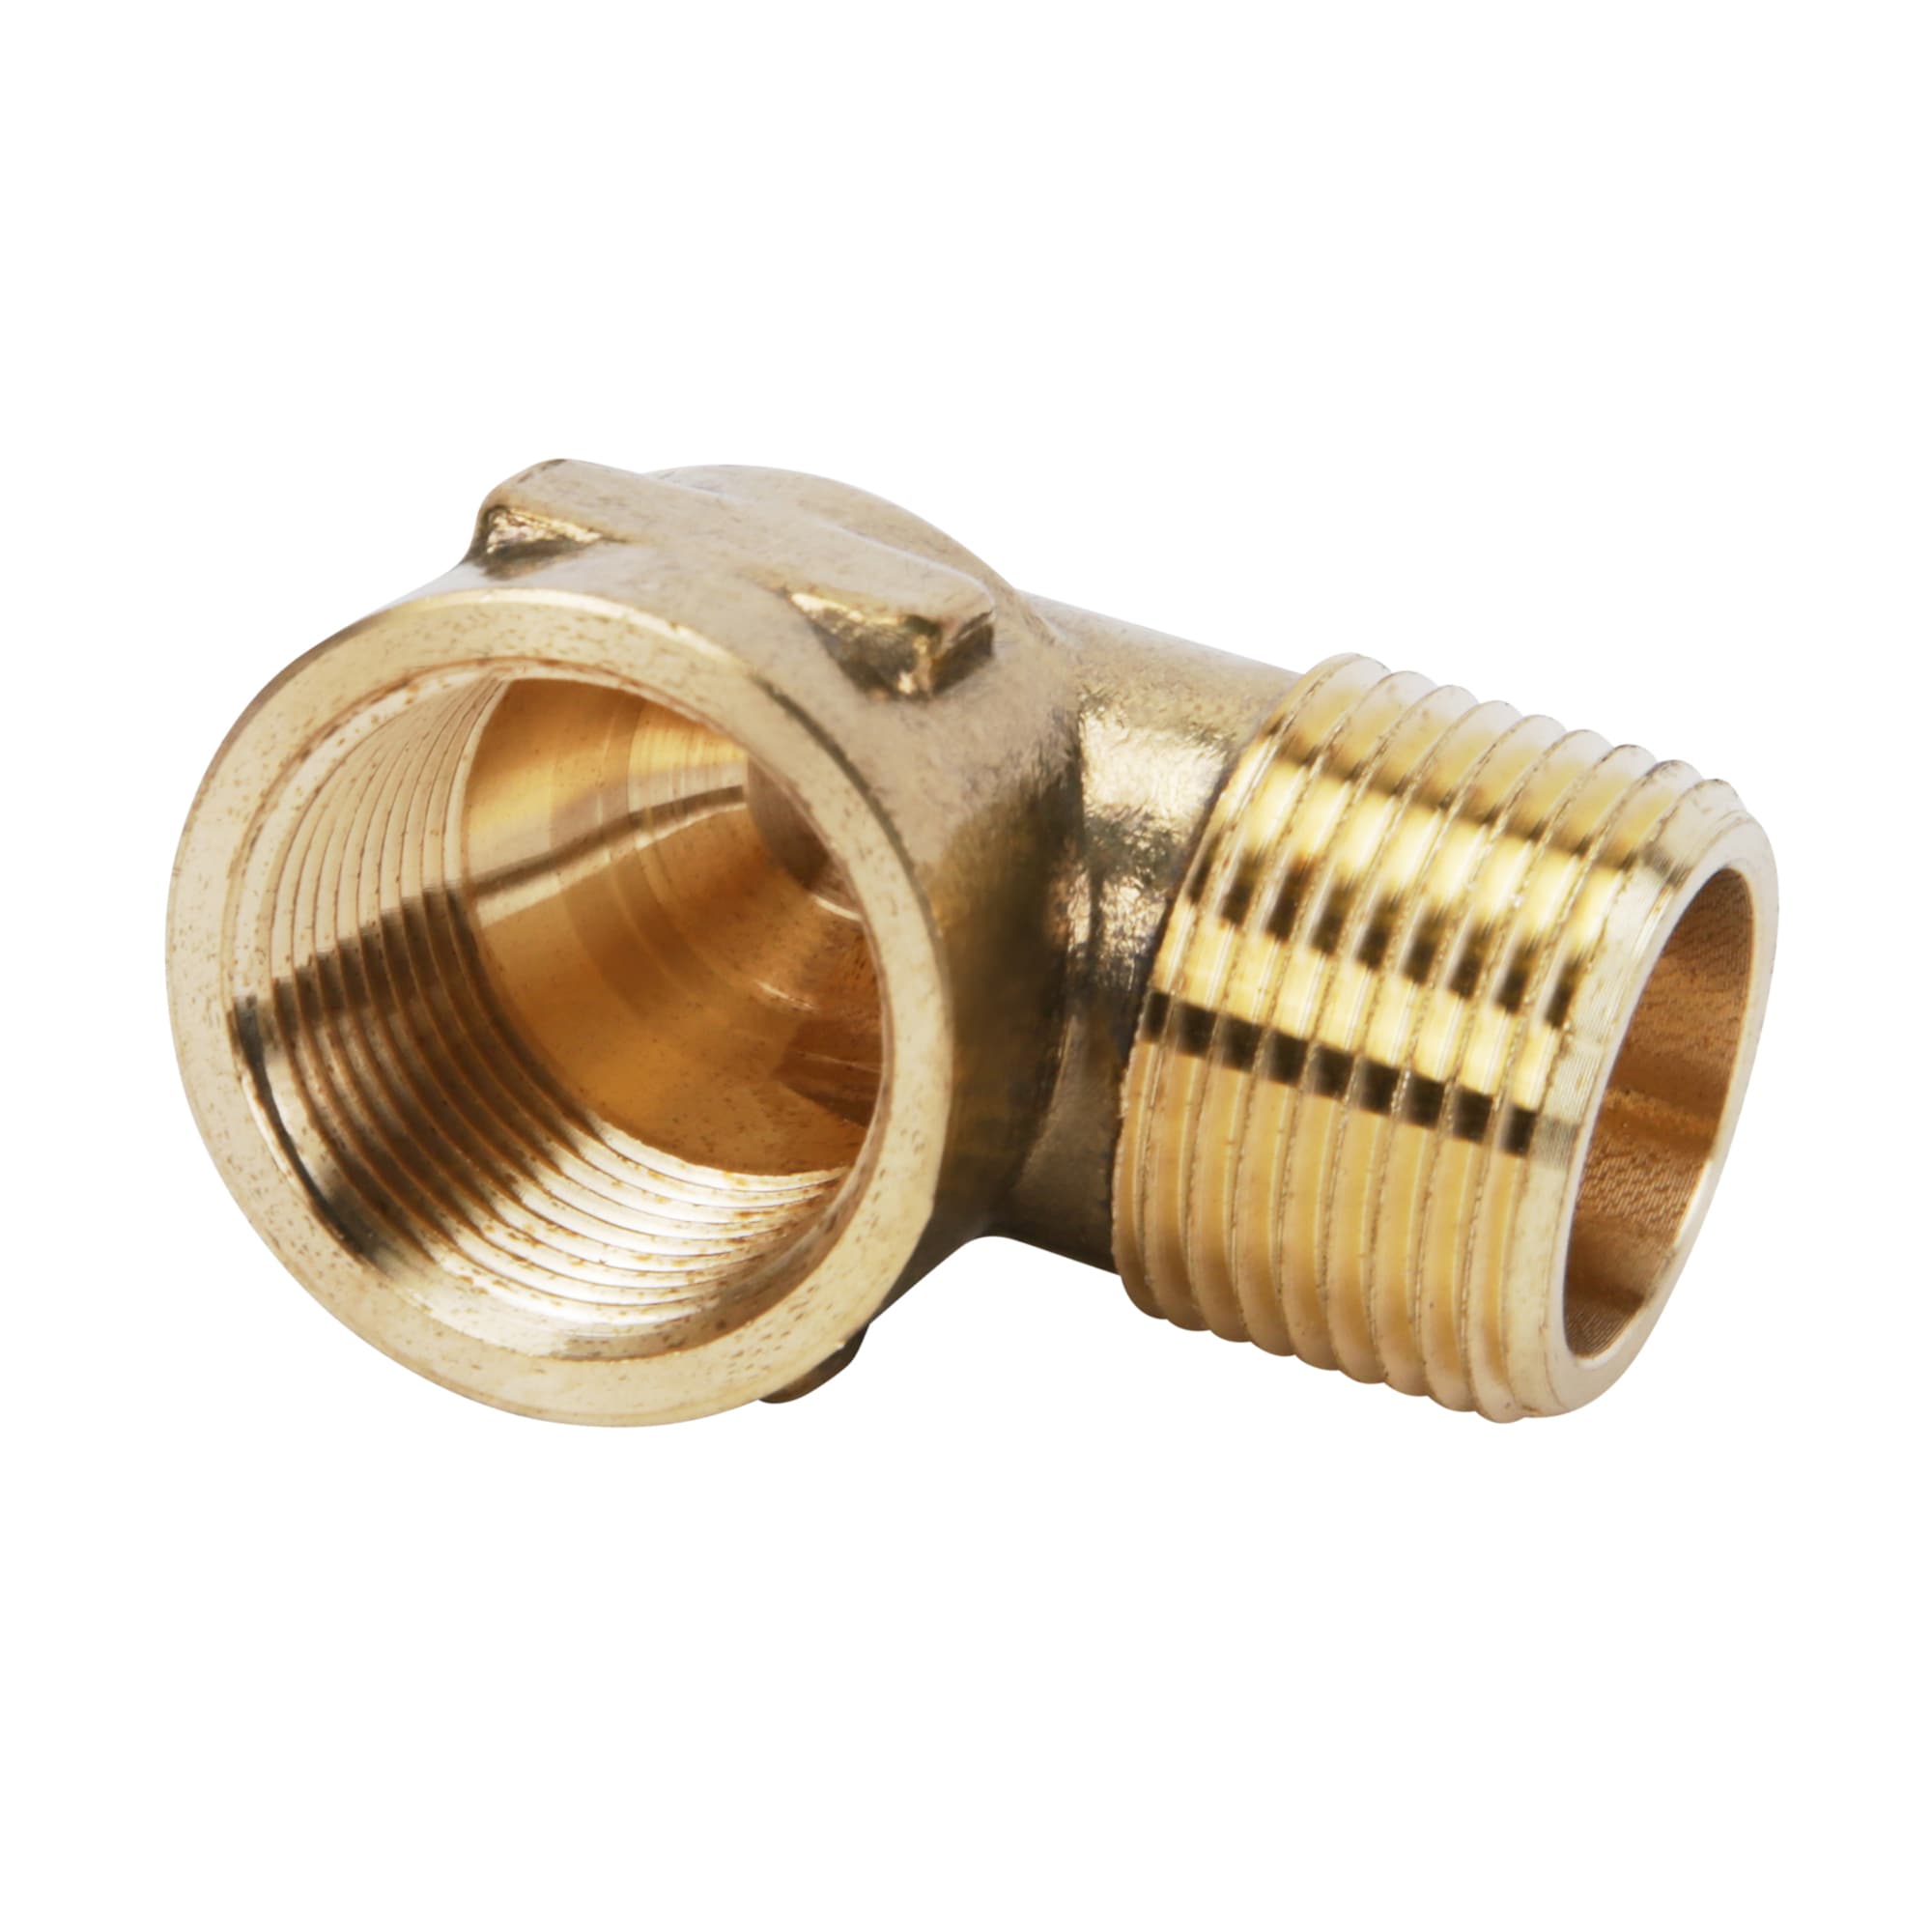 Proline Series 3/4-in x 3/4-in Threaded Tee Fitting in the Brass